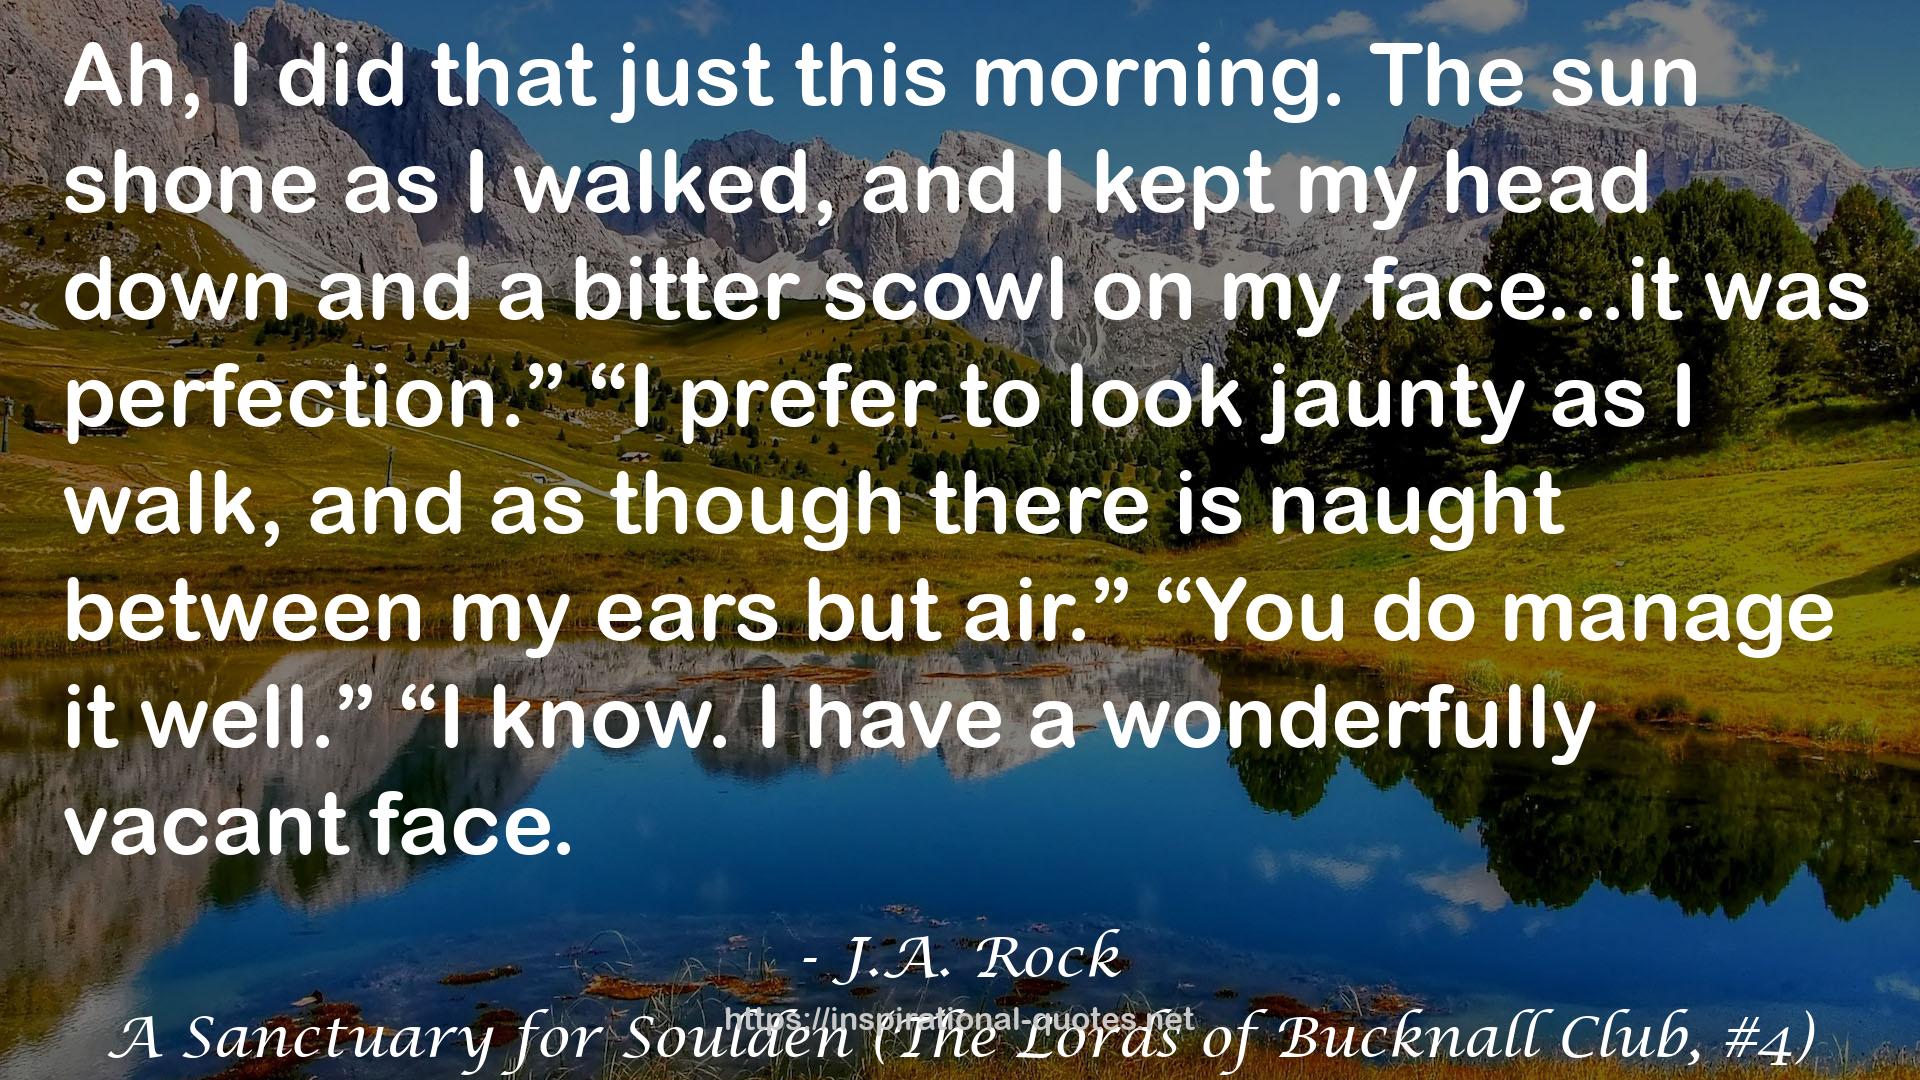 A Sanctuary for Soulden (The Lords of Bucknall Club, #4) QUOTES